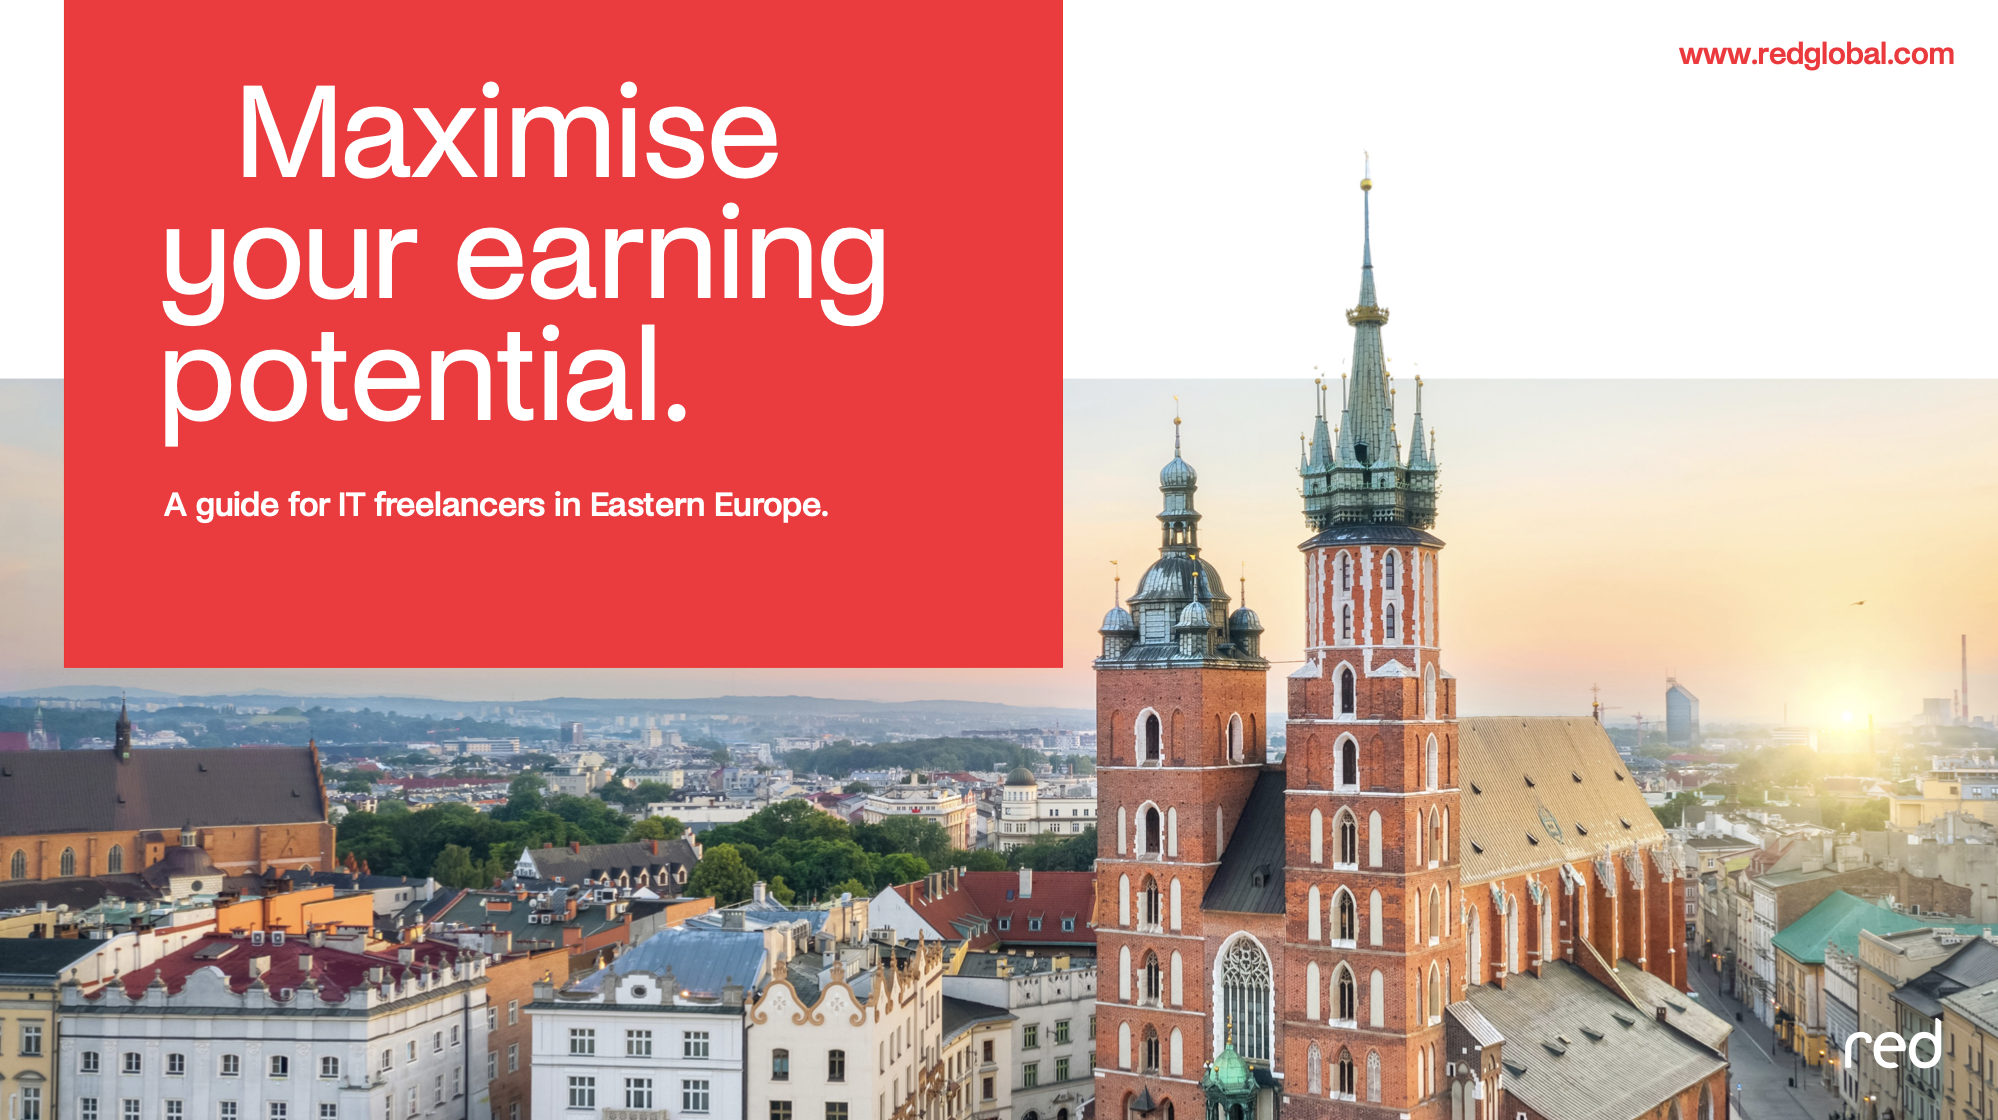 Maximise your earning potential as a freelancer in Eastern Europe.